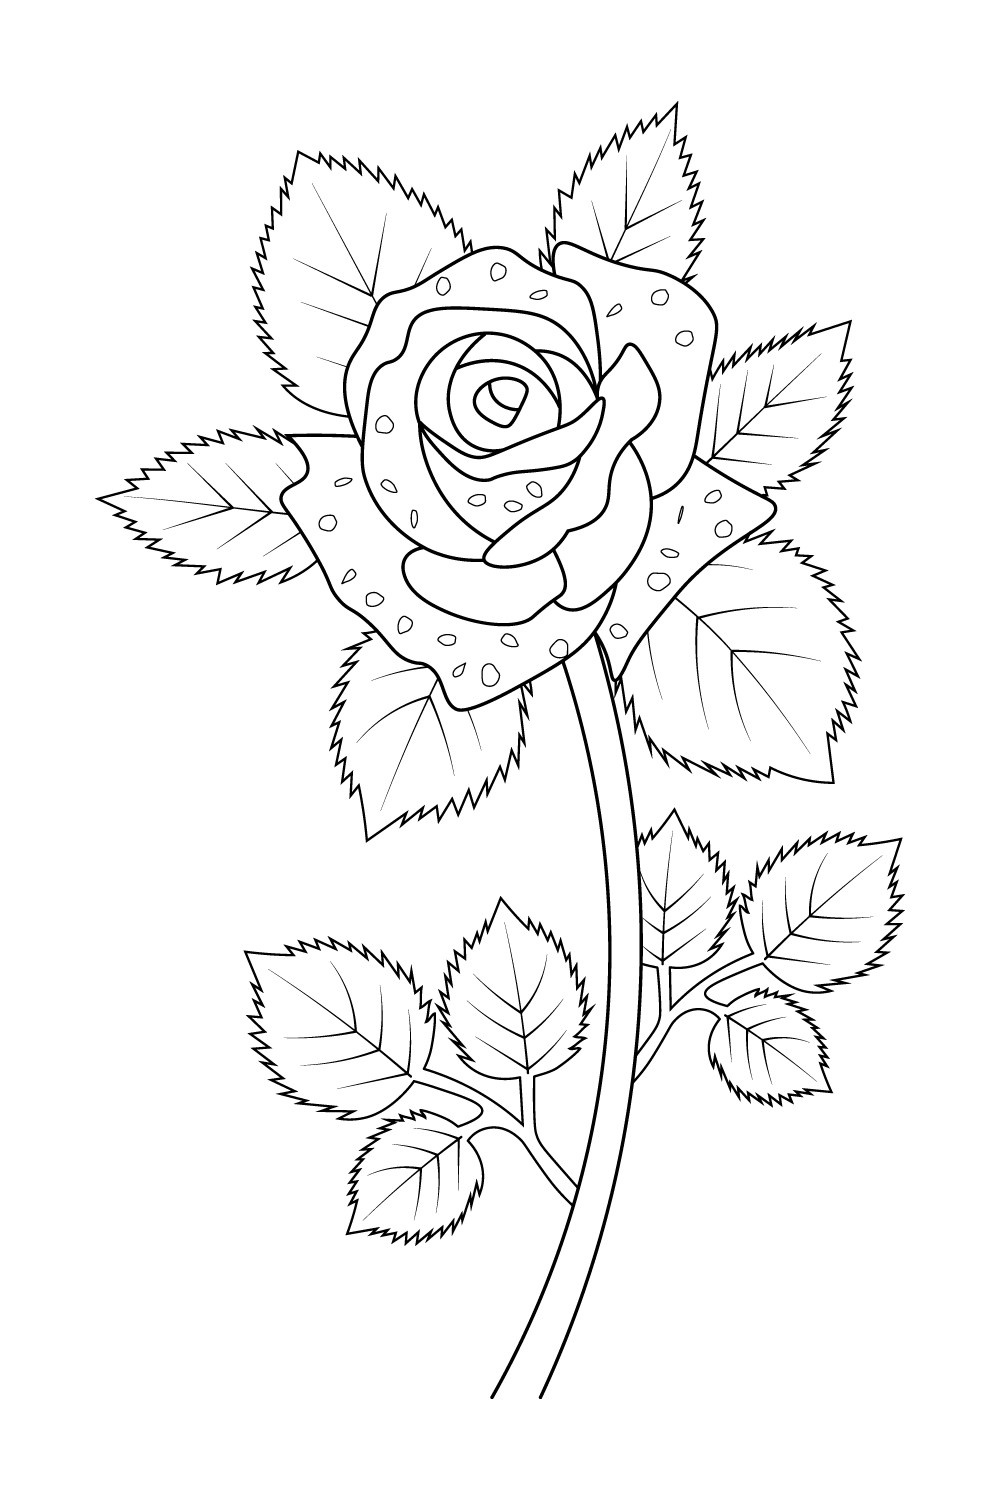 rose flower bouquet drawing outline, rose drawing, rose drawing the outline, stencil rose drawing outline, outline stencil rose tattoo drawing, realistic rose outline stencil rose tattoo drawing, rose flower bouquet pinterest preview image.